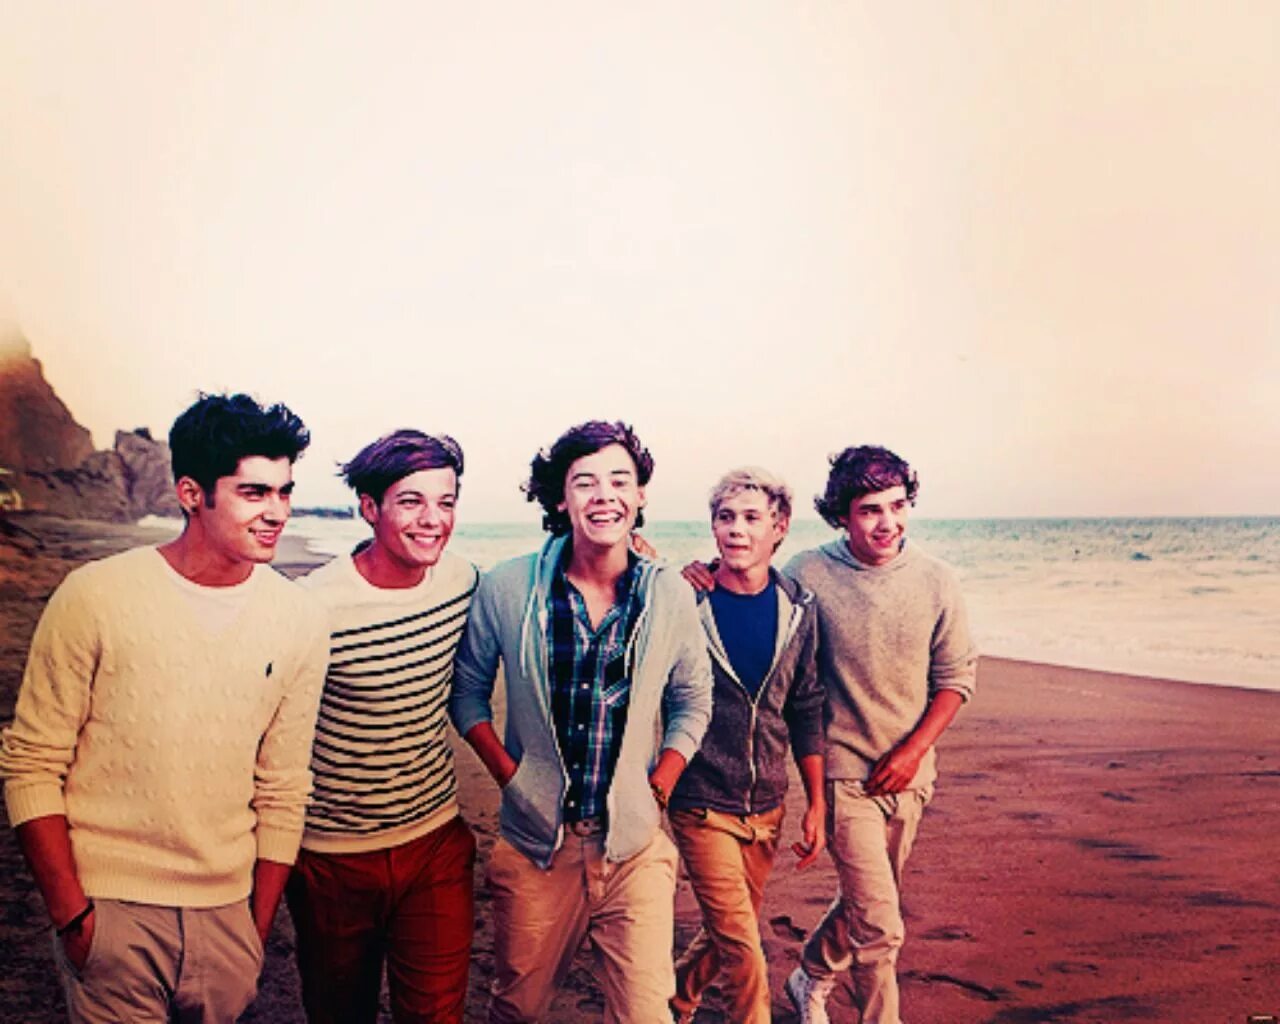 One Direction. One Direction what makes you beautiful. "What makes you beautiful" by one Direction. Фото you beautiful.